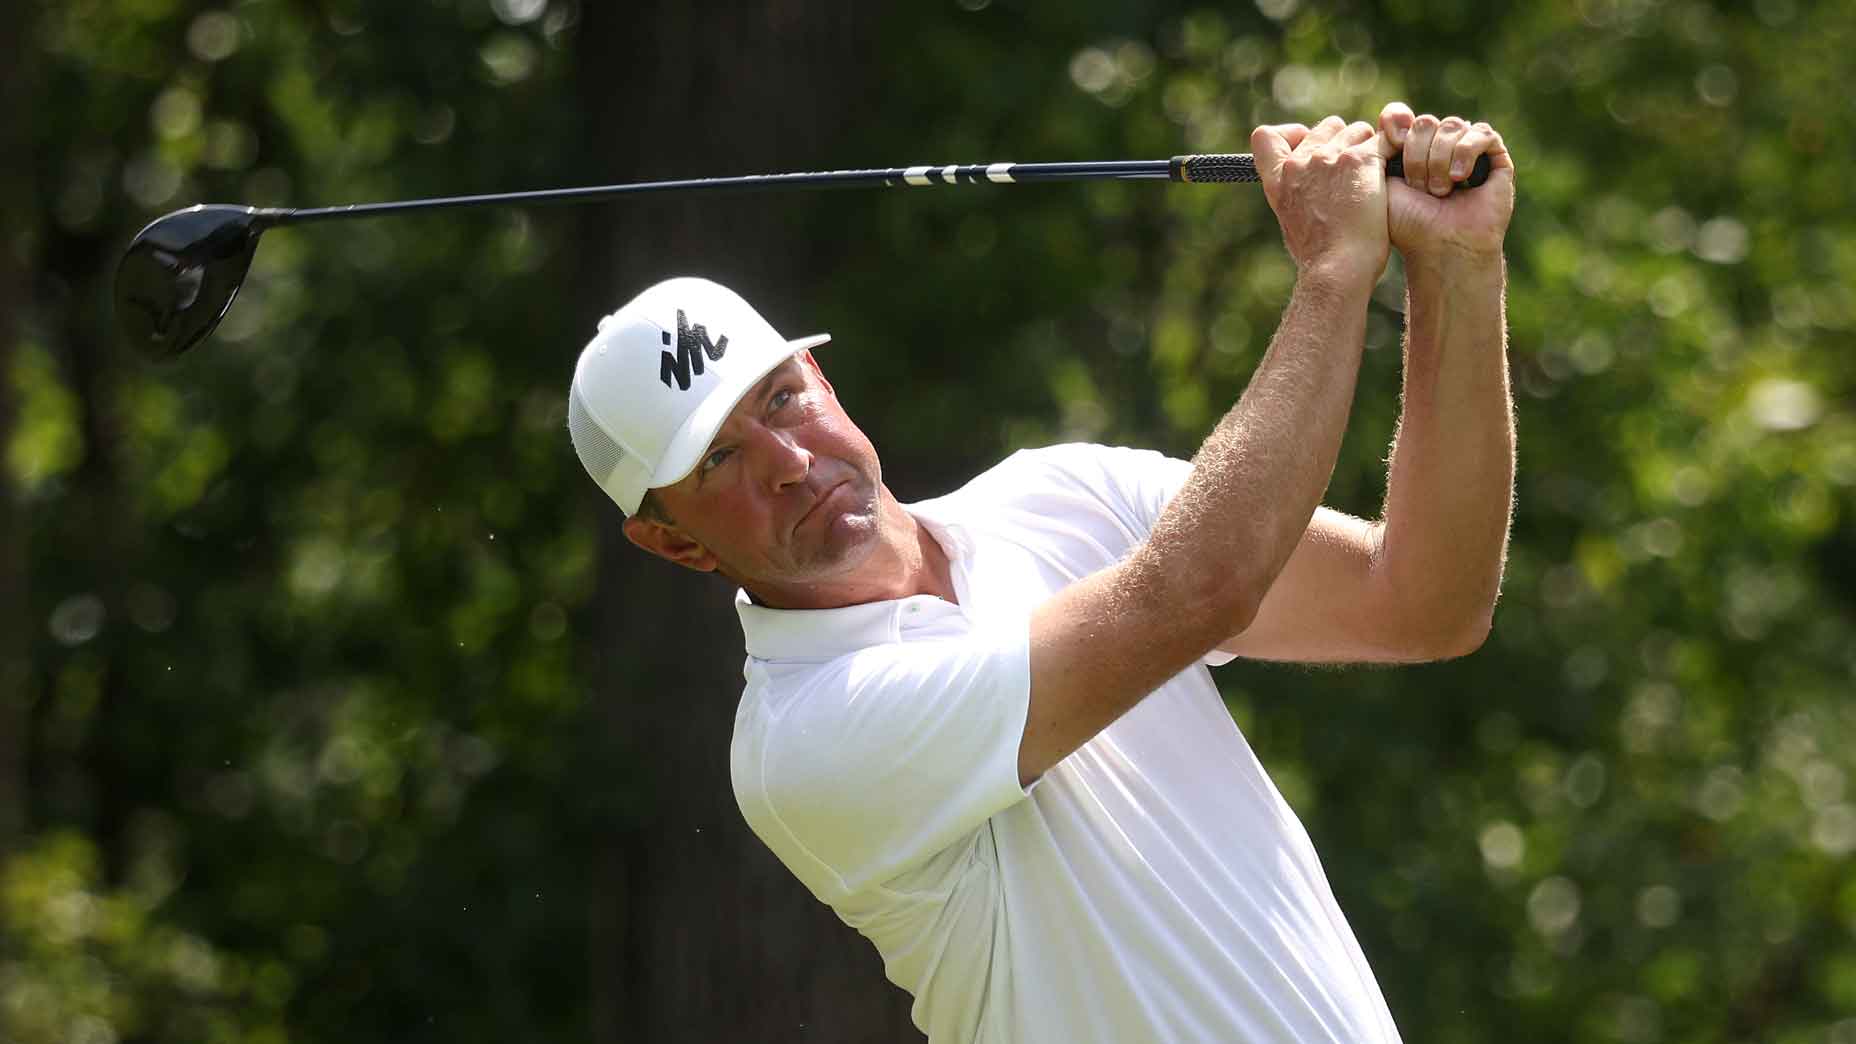 Lucas Glover explains why he doesn't wear a golf glove